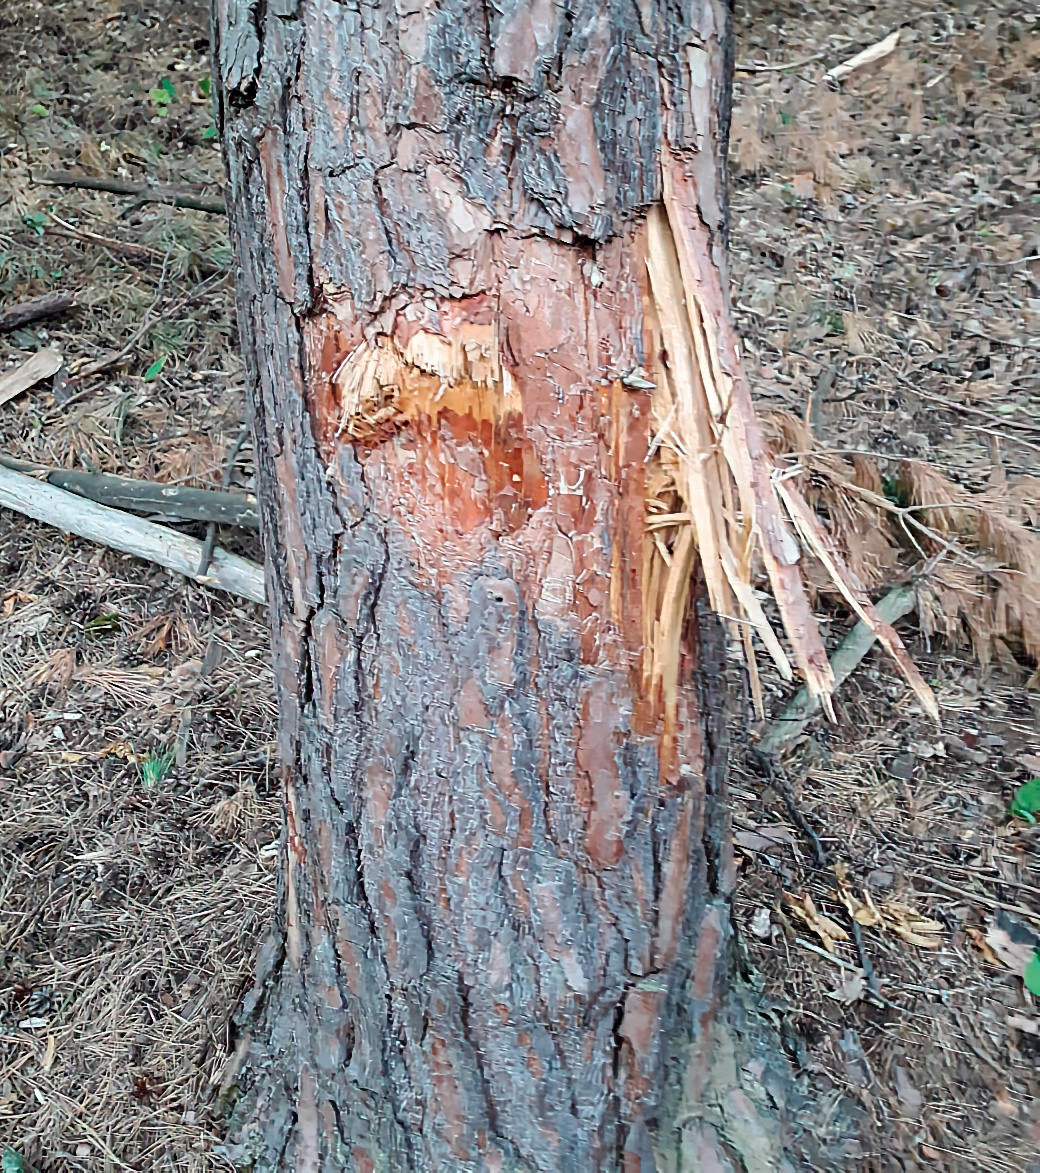 Figure 9: A projectile (probably a heavy machine-gun bullet) has passed through the stem of this pine tree, leaving an entrance and exit wound. 